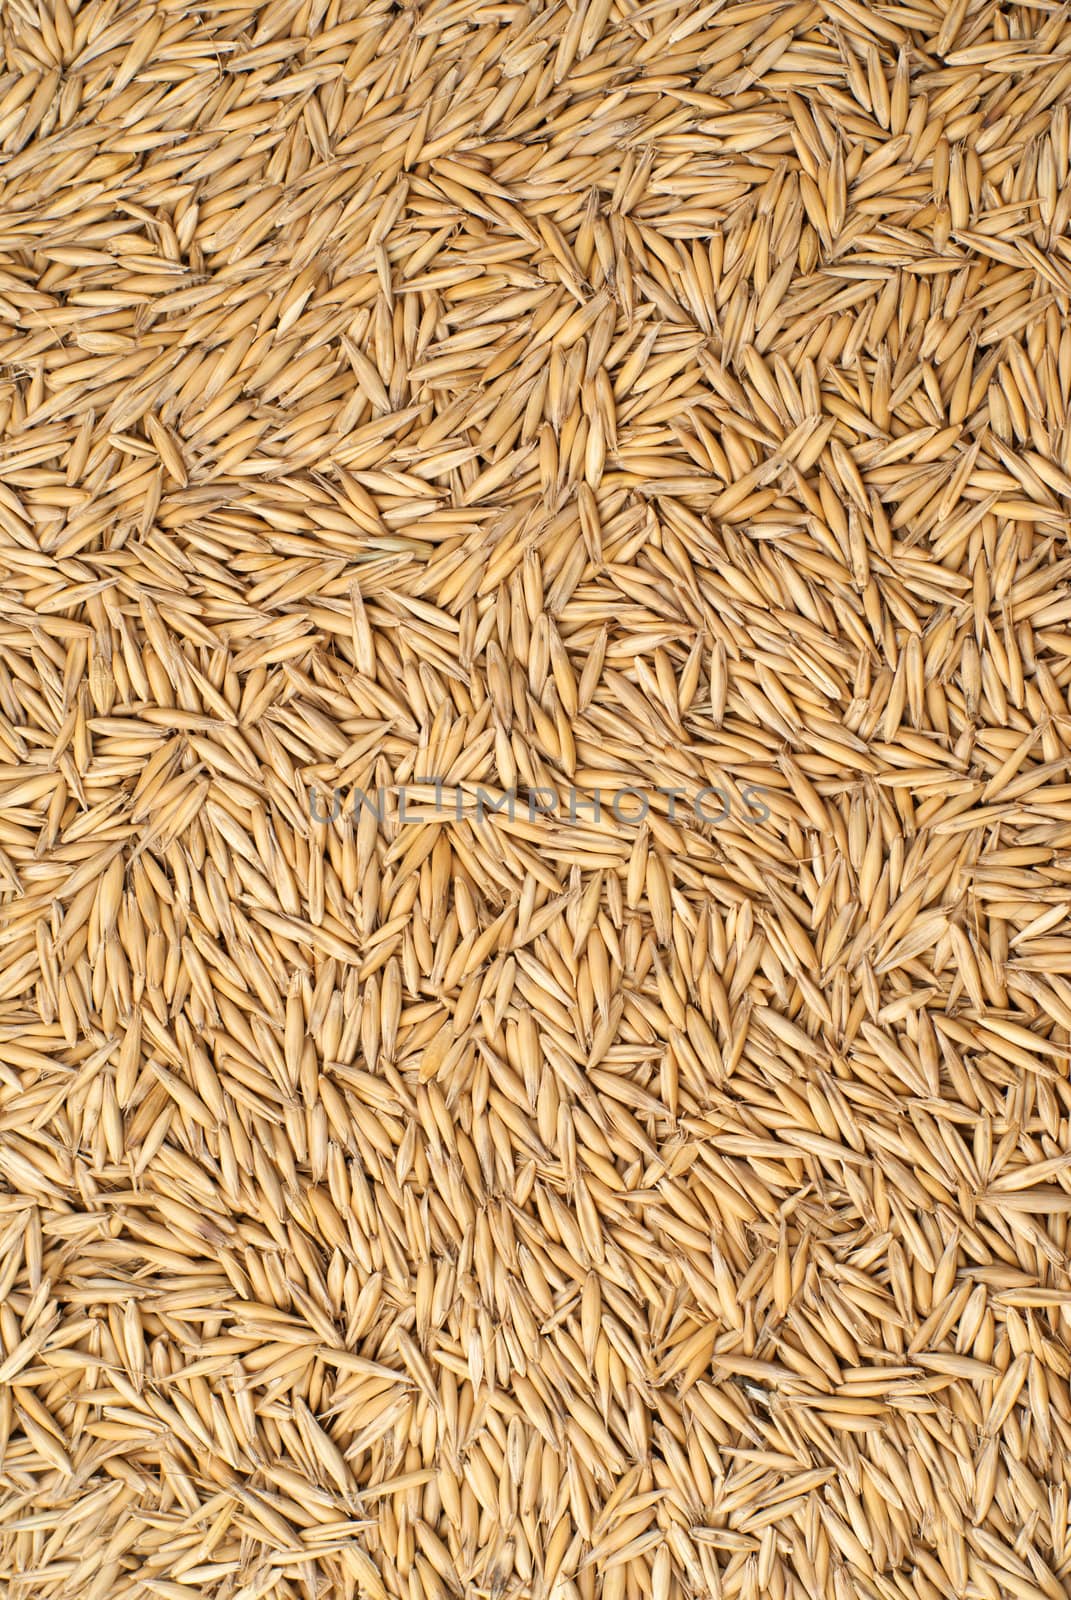 poured oat